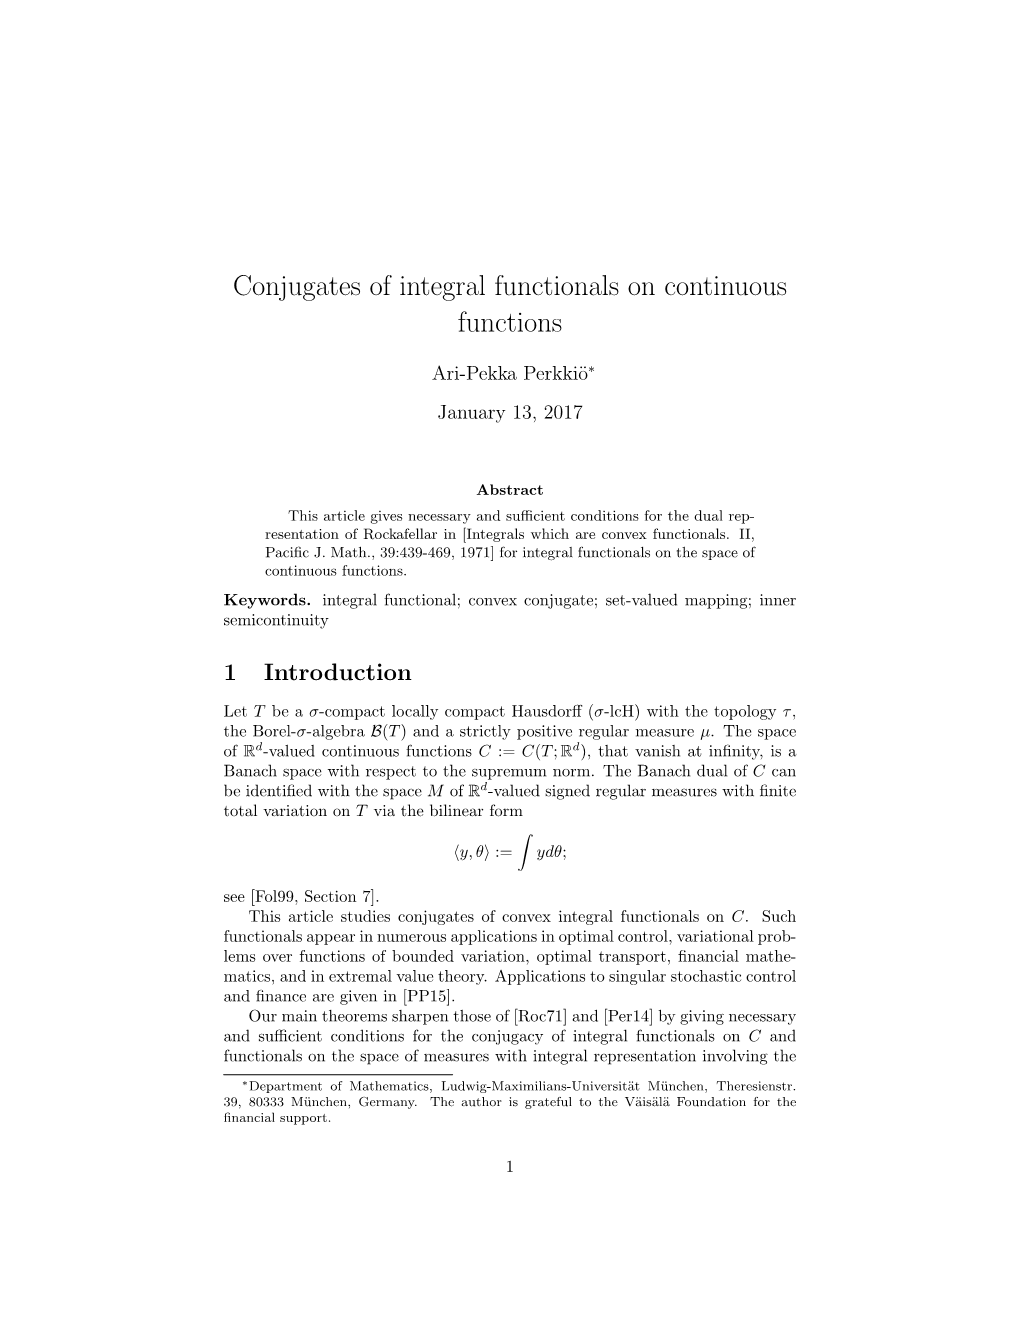 Conjugates of Integral Functionals on Continuous Functions